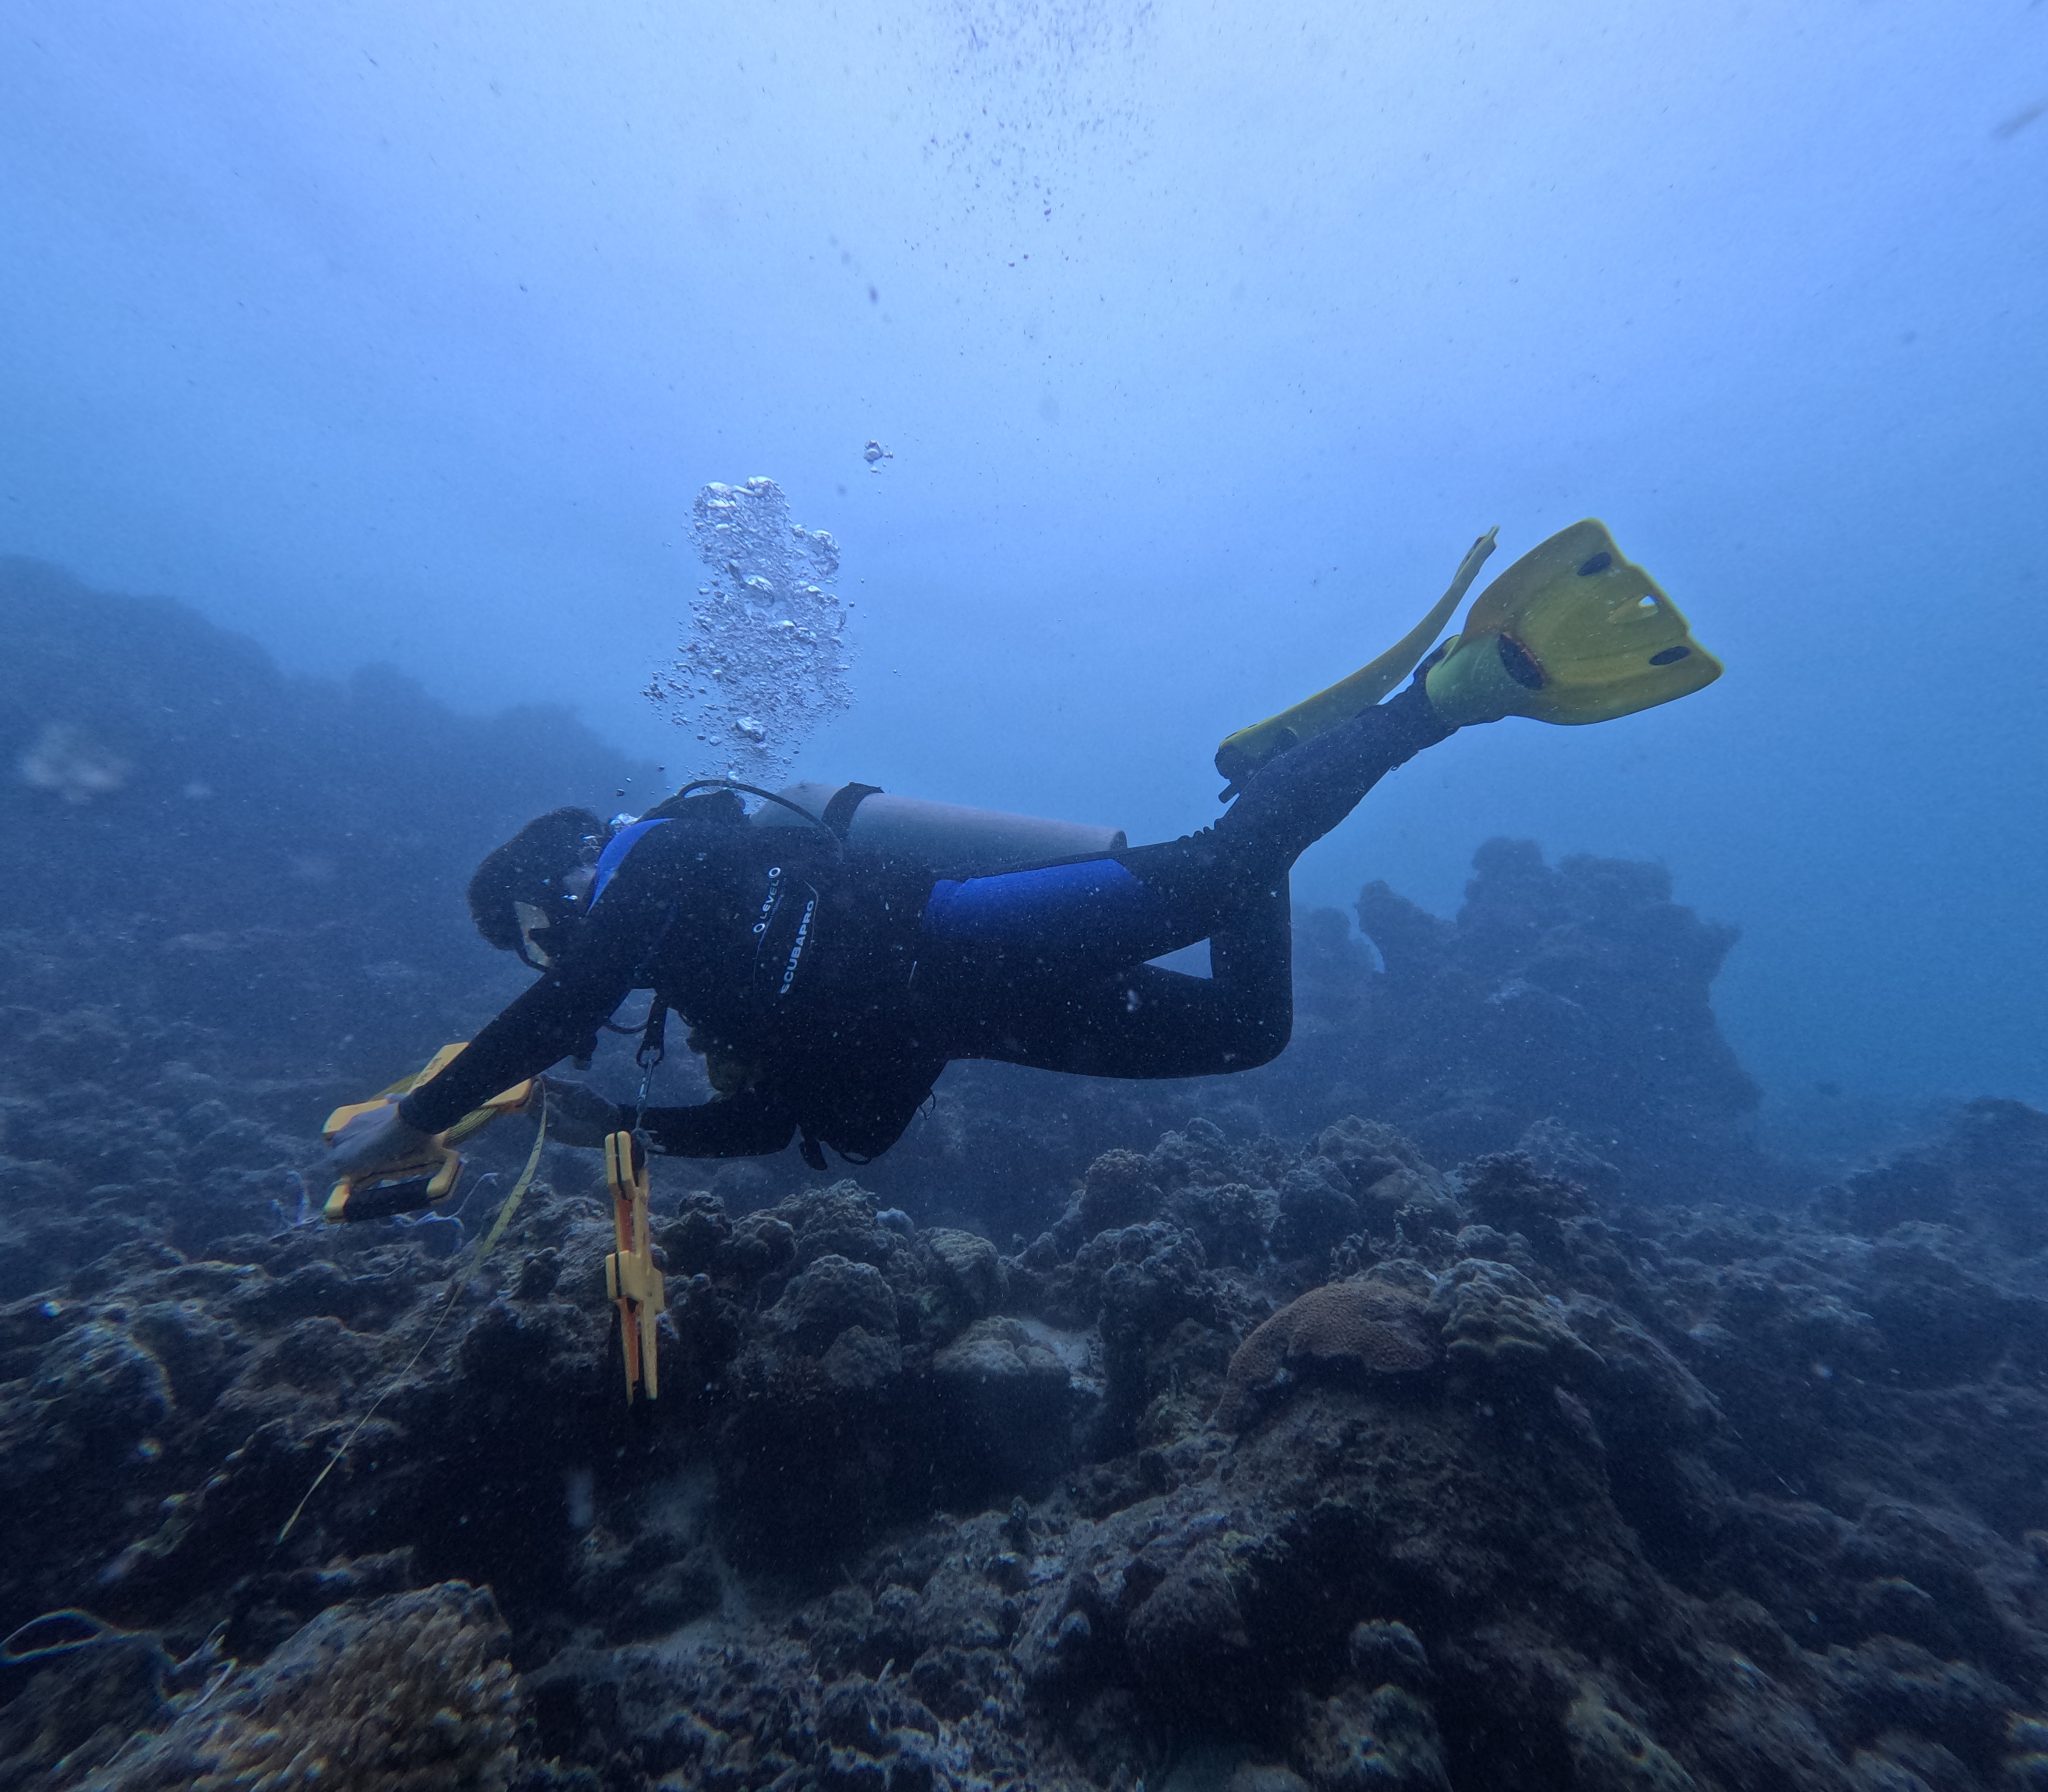 The SEE Conservation project conducted a comprehensive habitat assessment for the Bugas Marine Protected Area